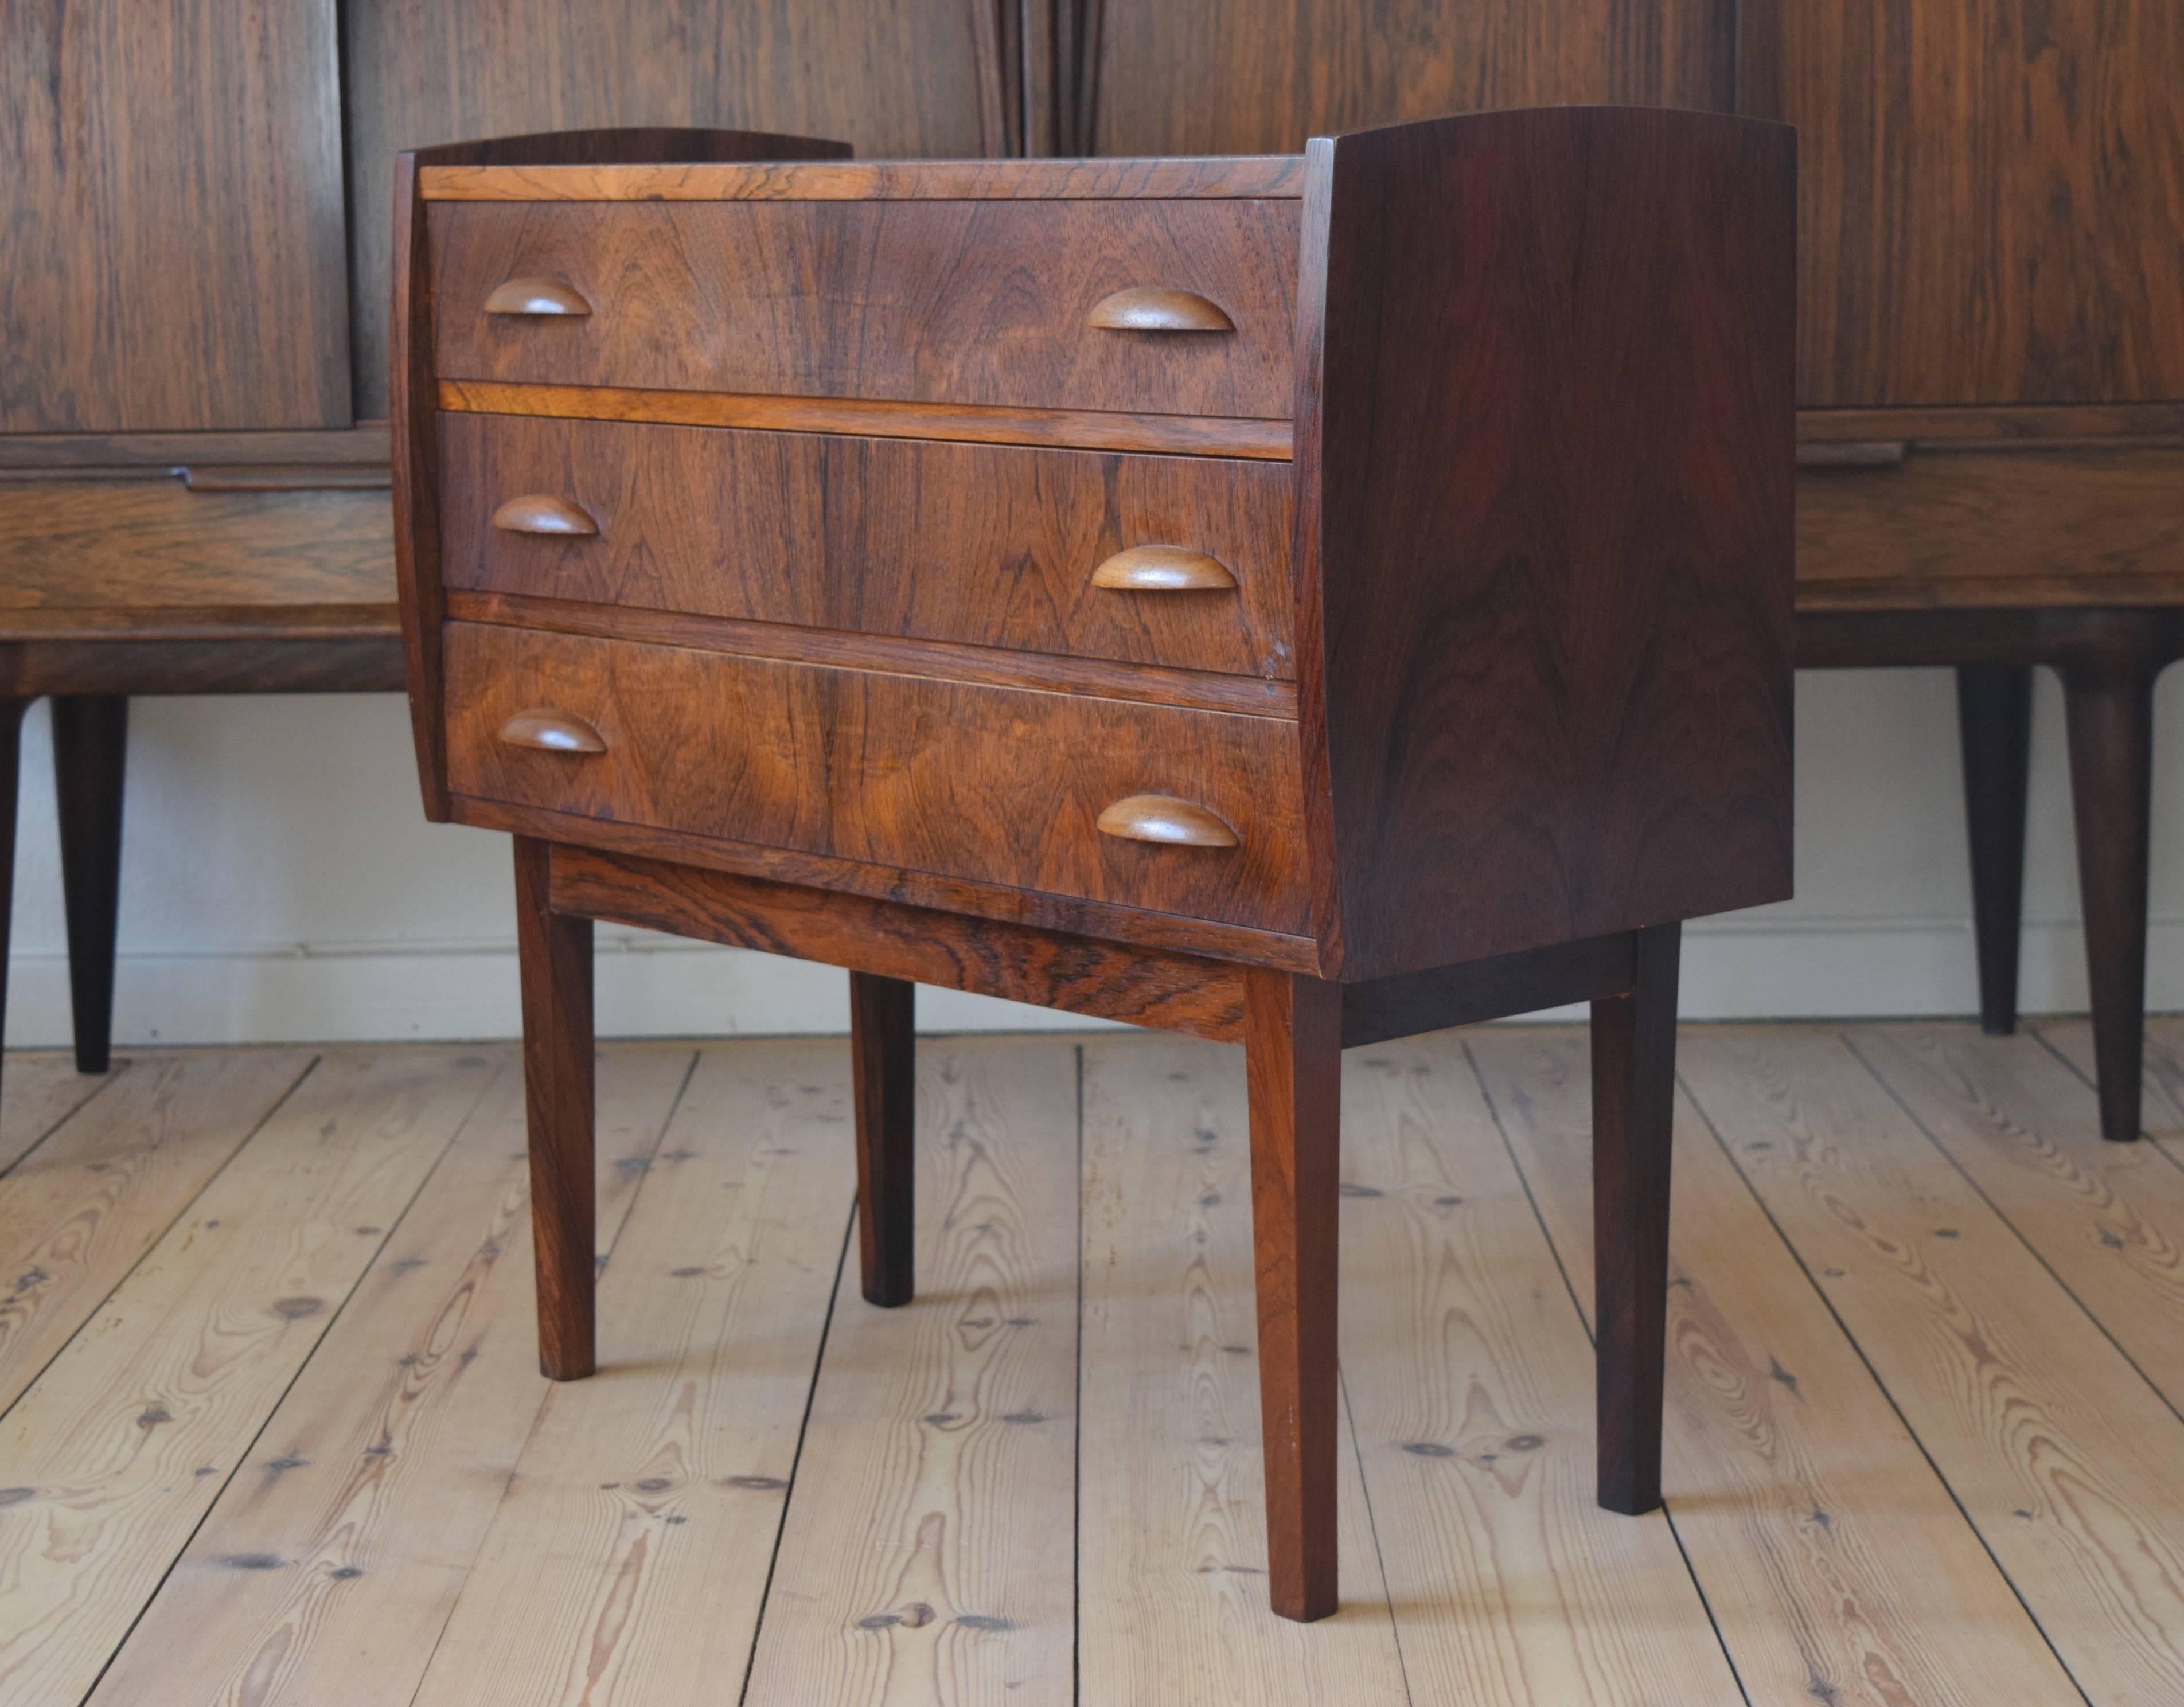 Small three-drawer chest designed and manufactured in Denmark in the 1960s. Features teak orange slice handles and sits on a solid rosewood and veneer frame base. Striking grain throughout.